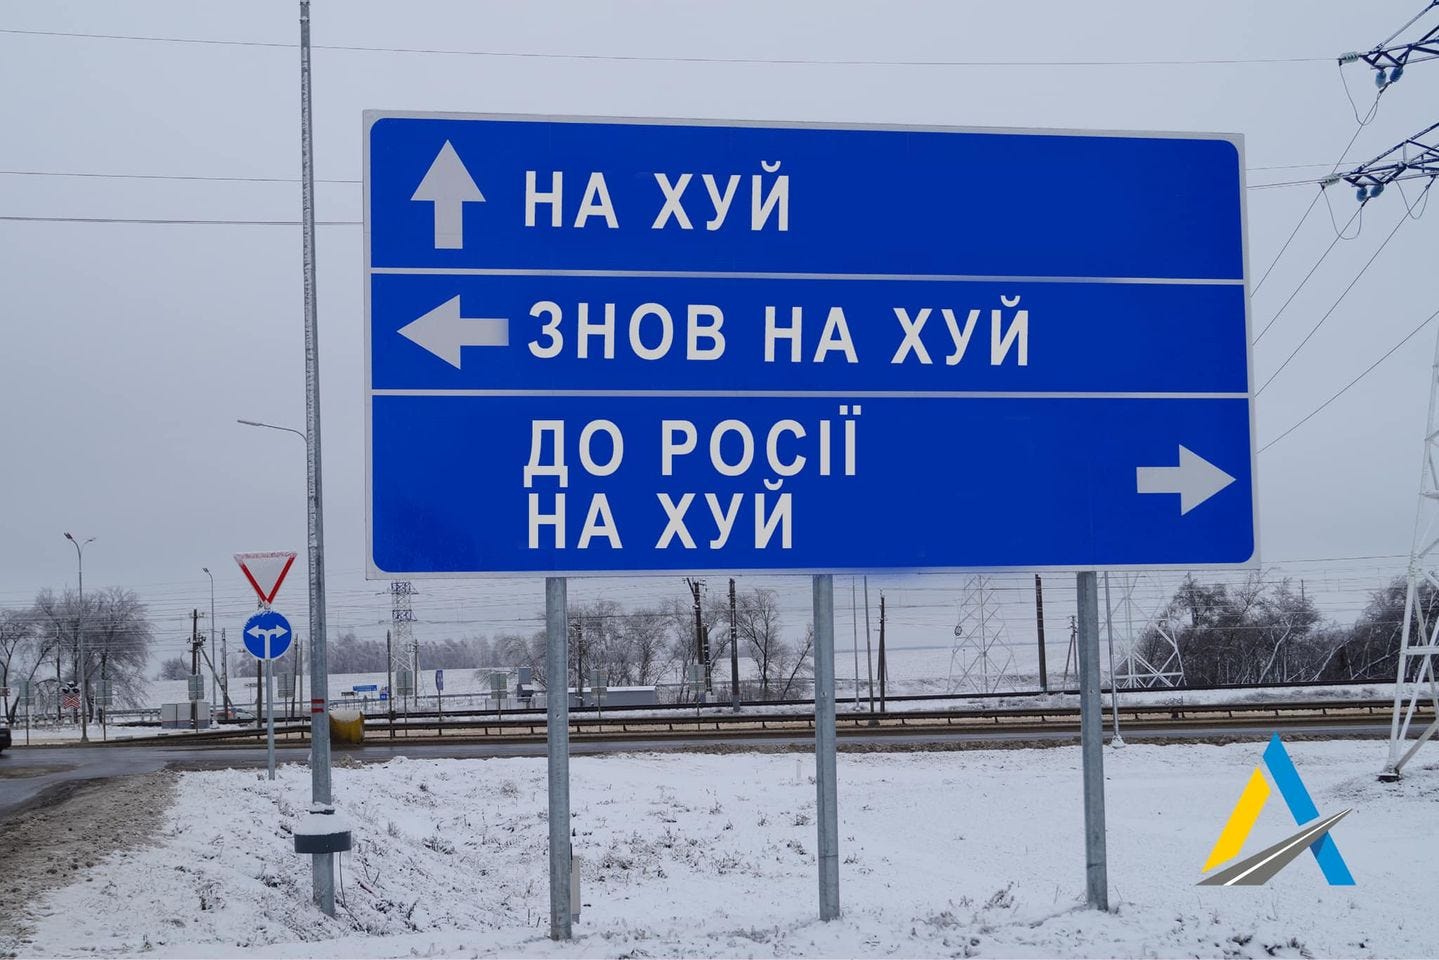 Does Ukrainian Road Sign Read 'Go F*ck Yourself Back to Russia'? |  Snopes.com